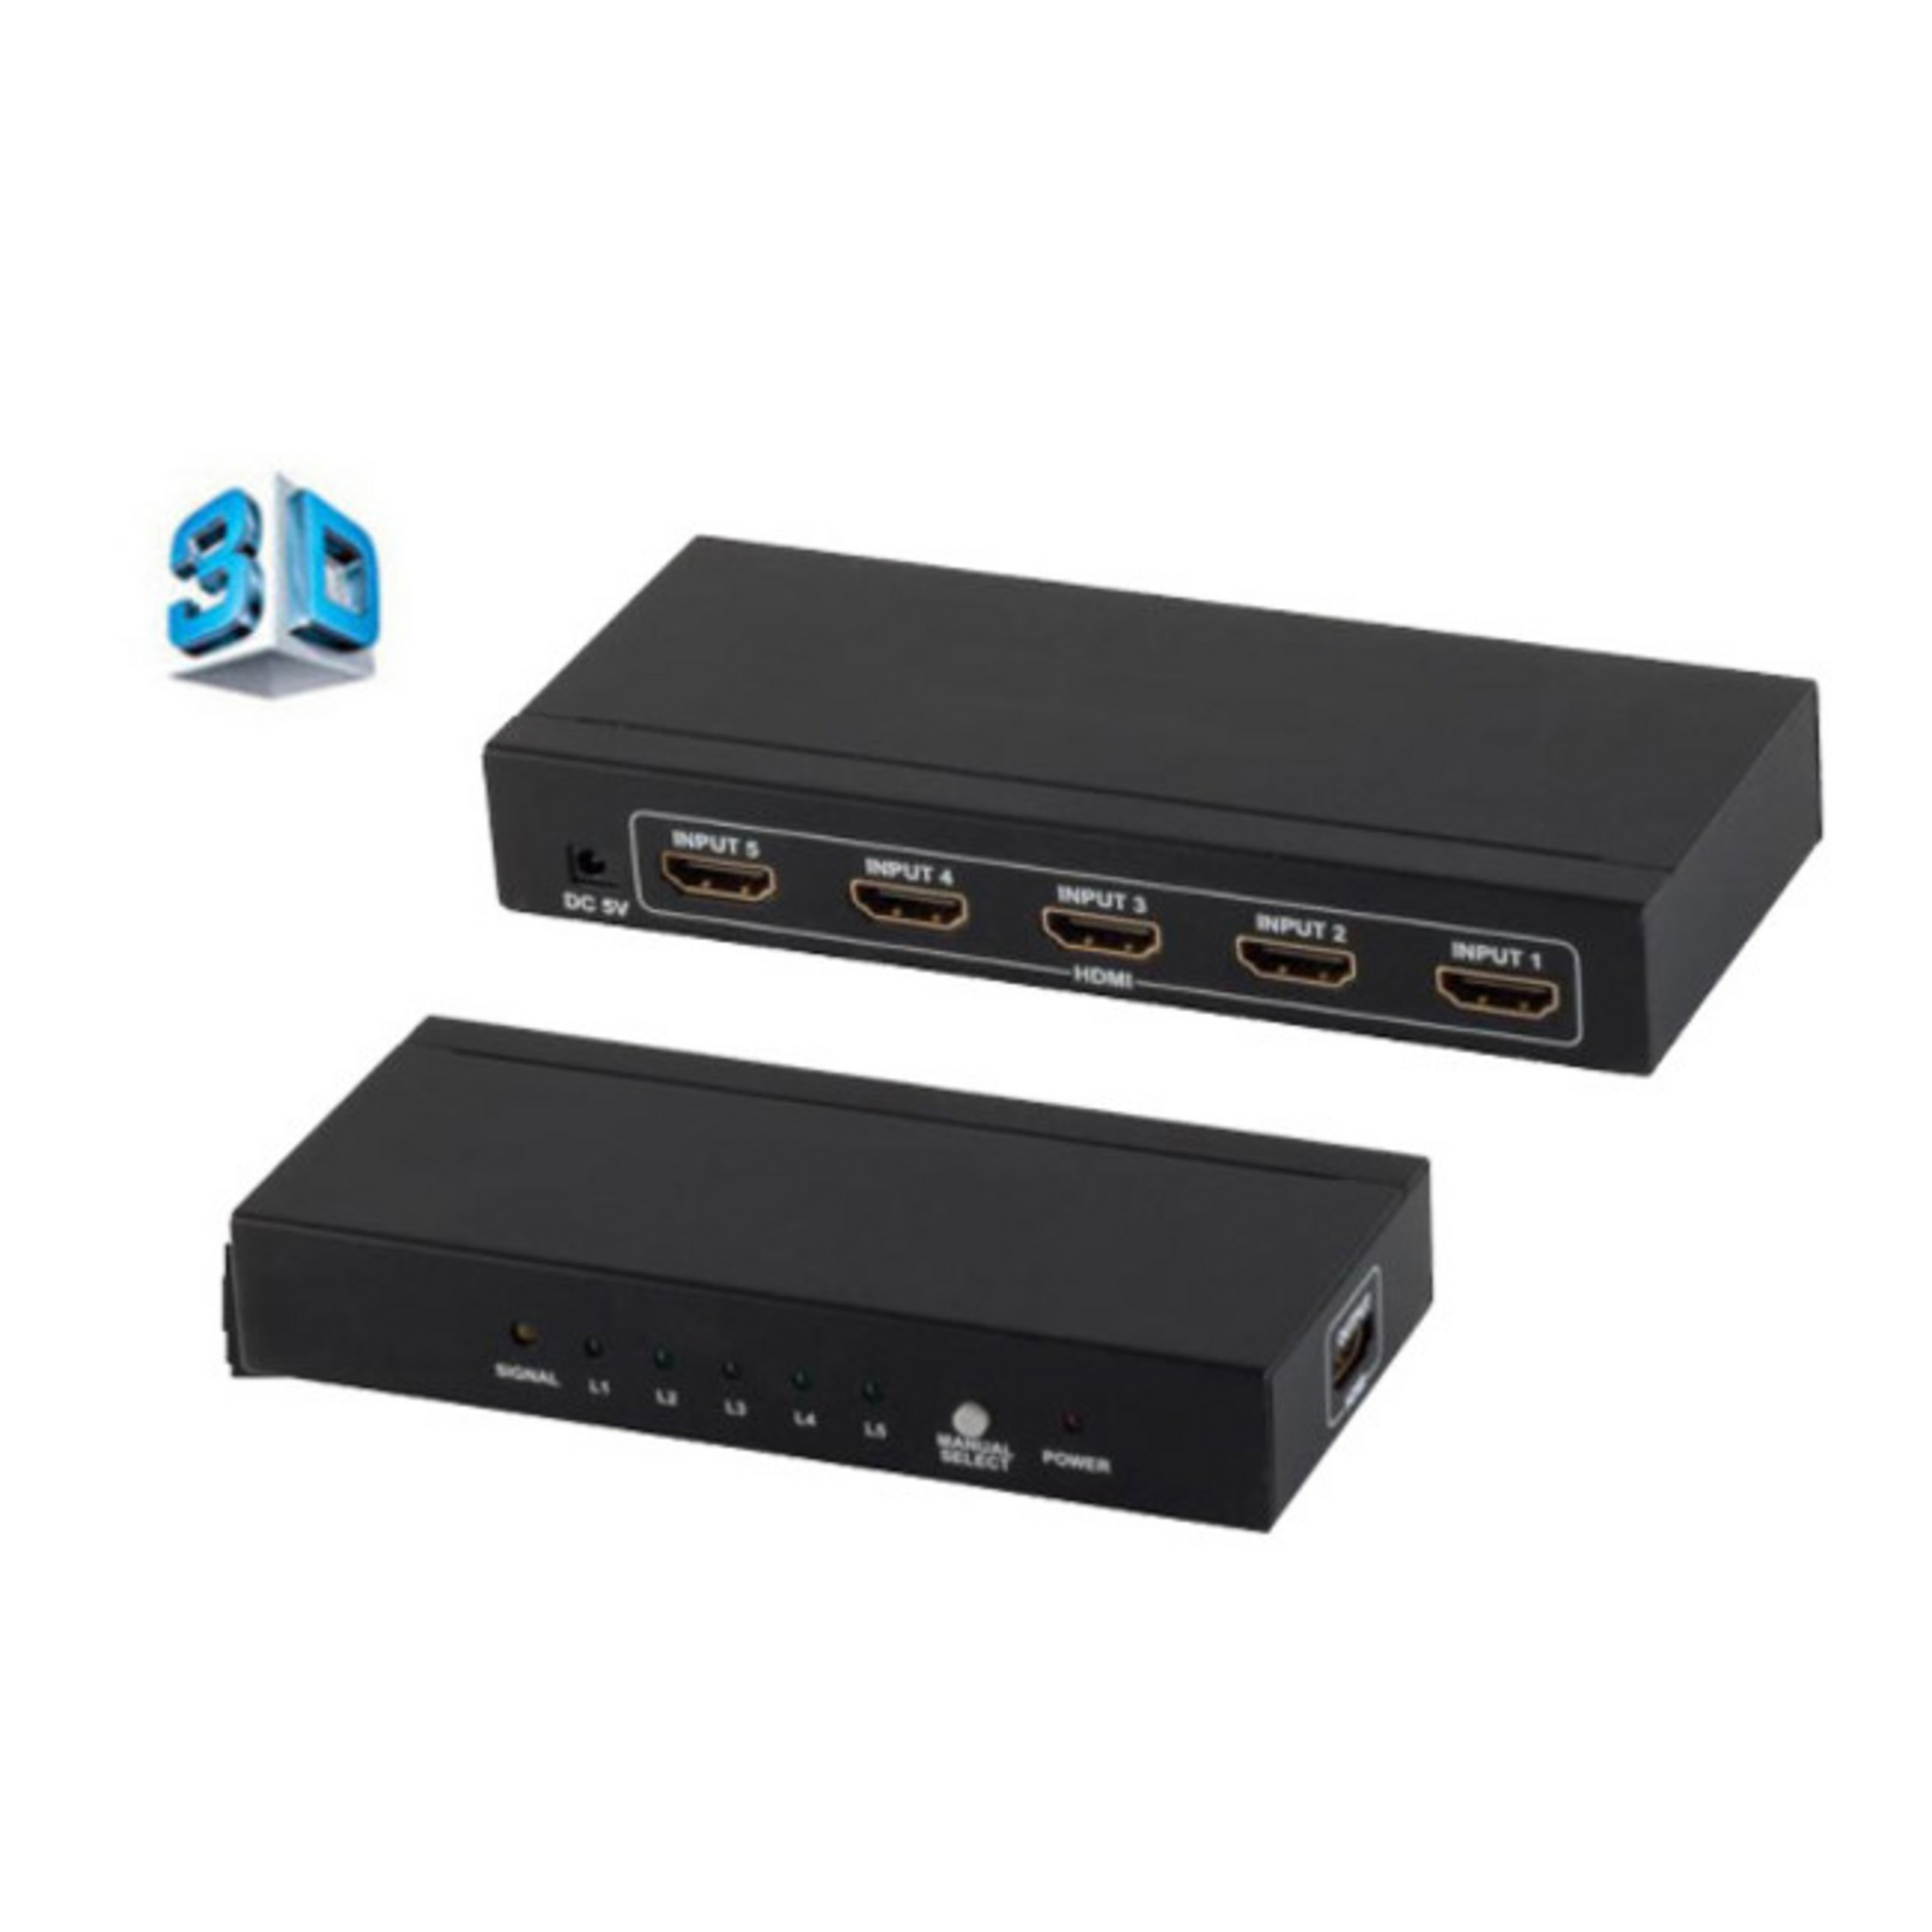 Switch, 1x HDMI IN OUT, 5x Switch SHIVERPEAKS HDMI 4K2K, VER1.4 3D,